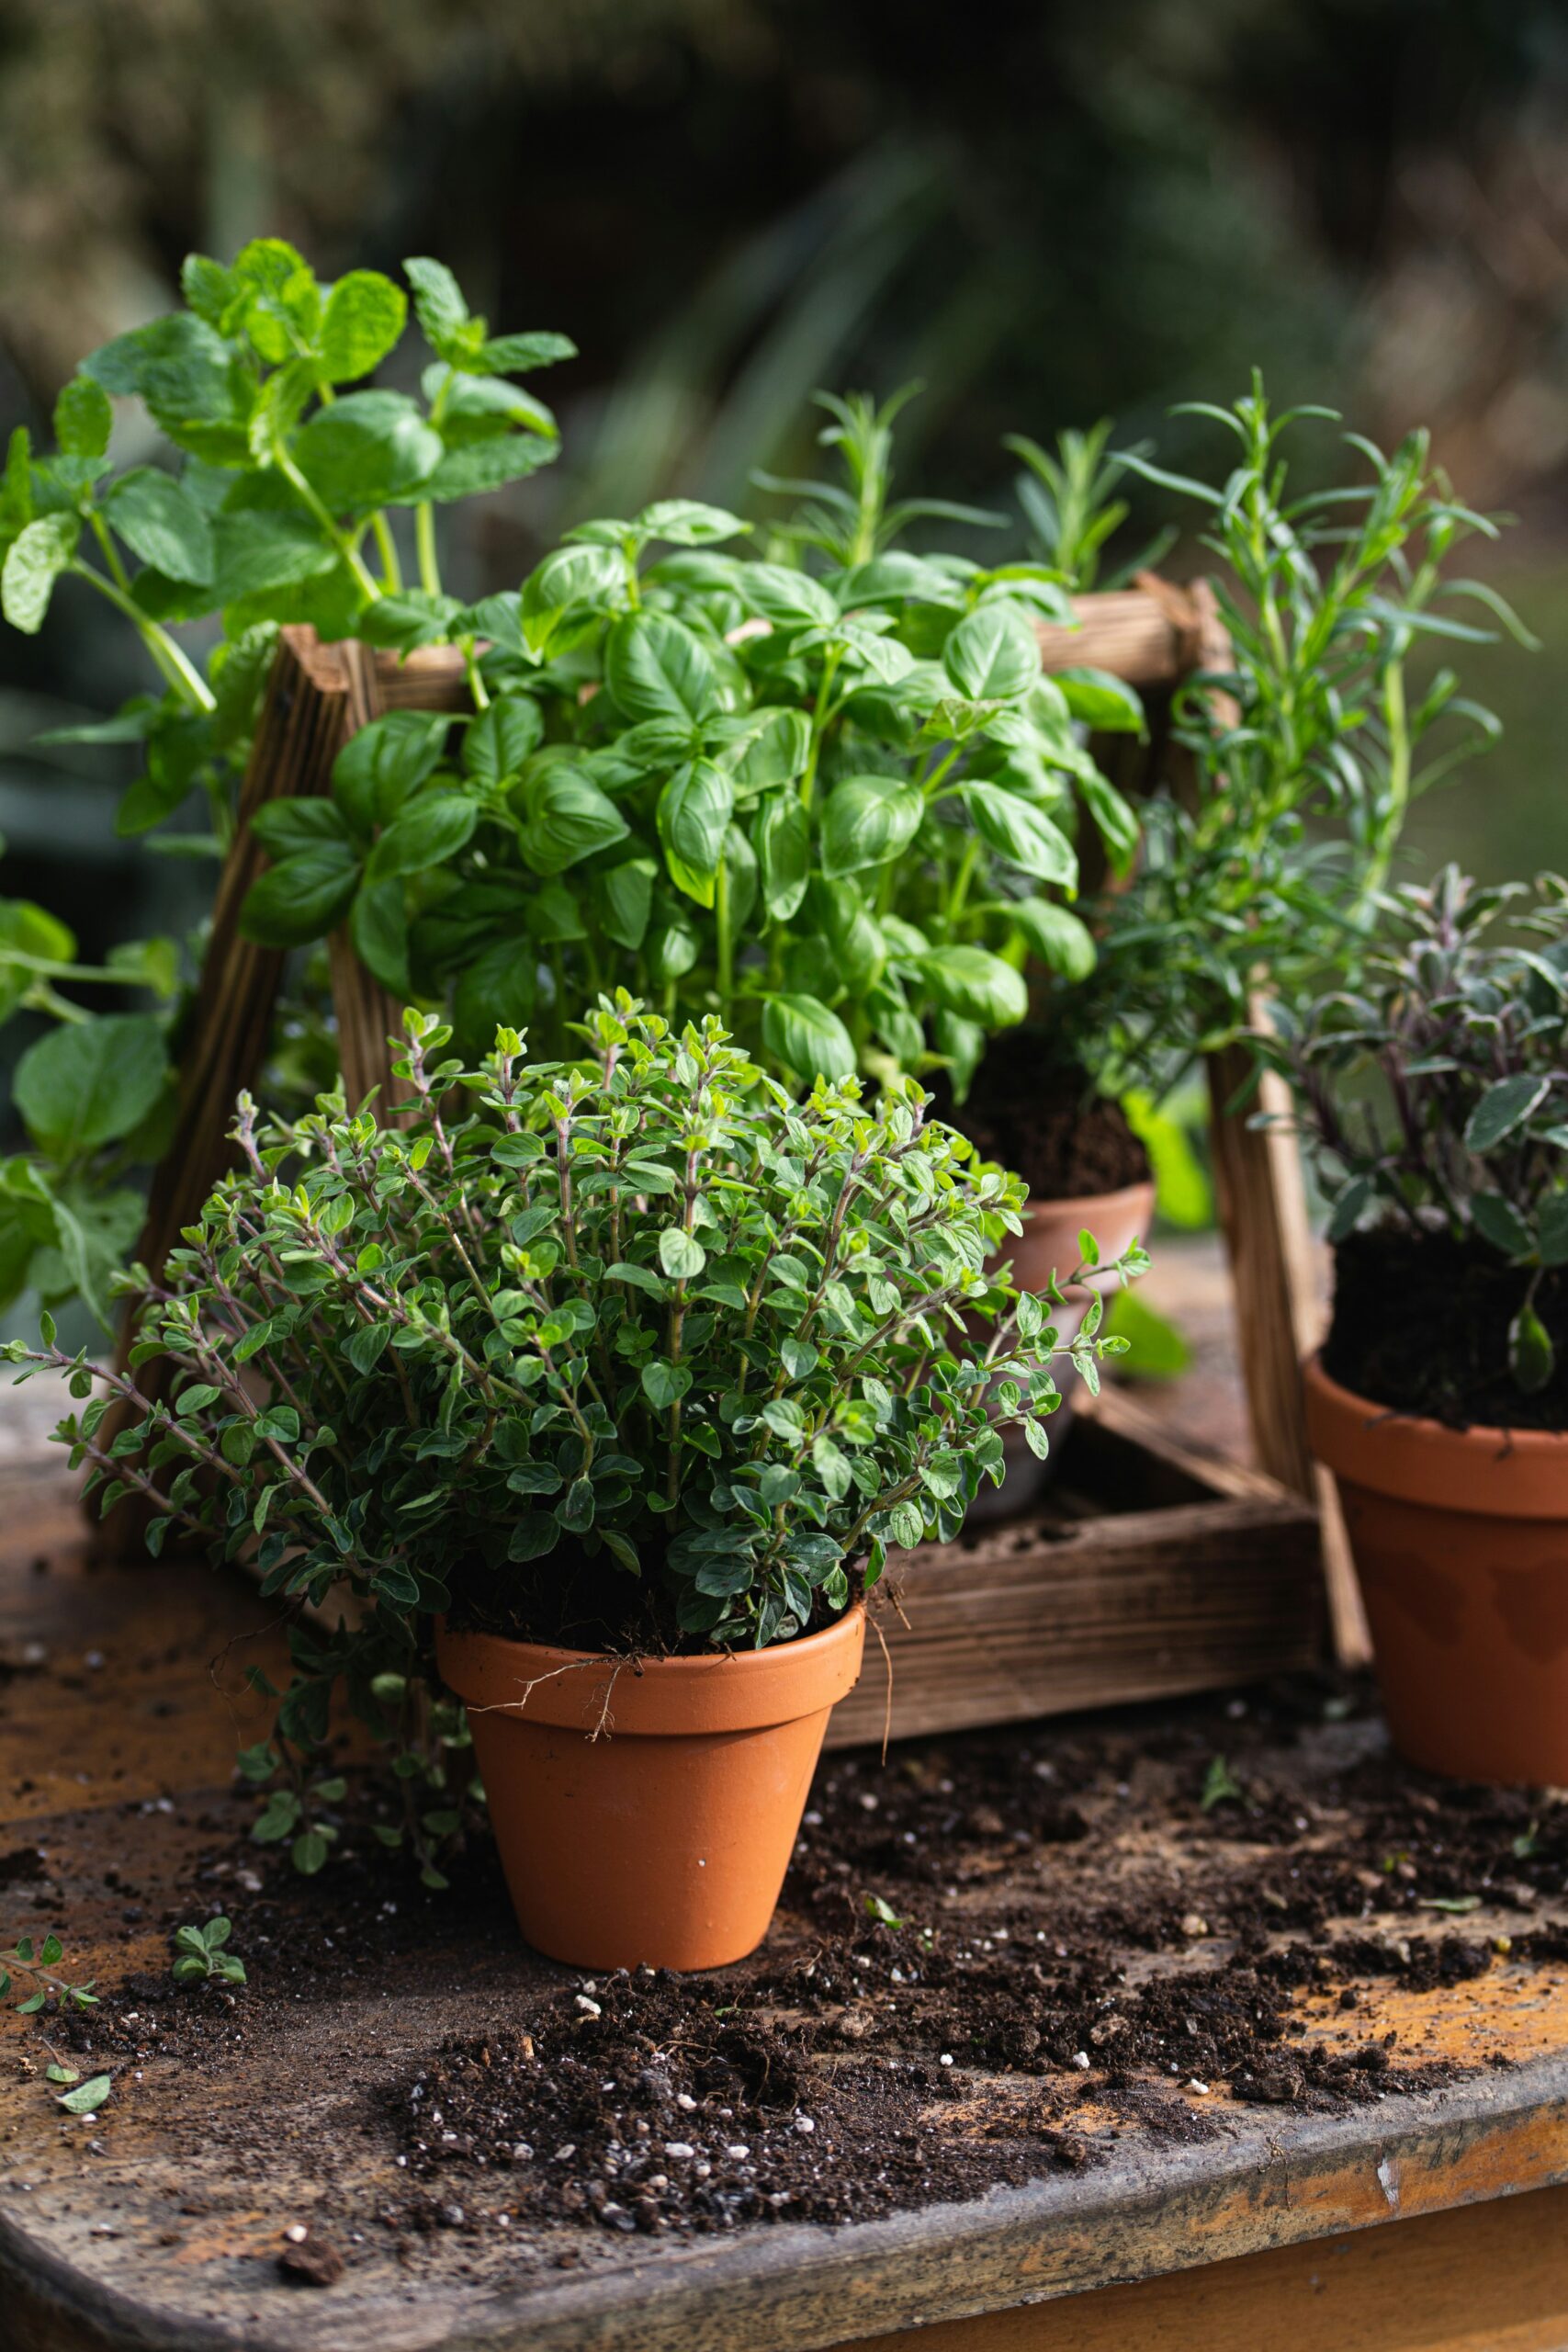 Container Gardening: Growing Fruits, Vegetables and Herbs